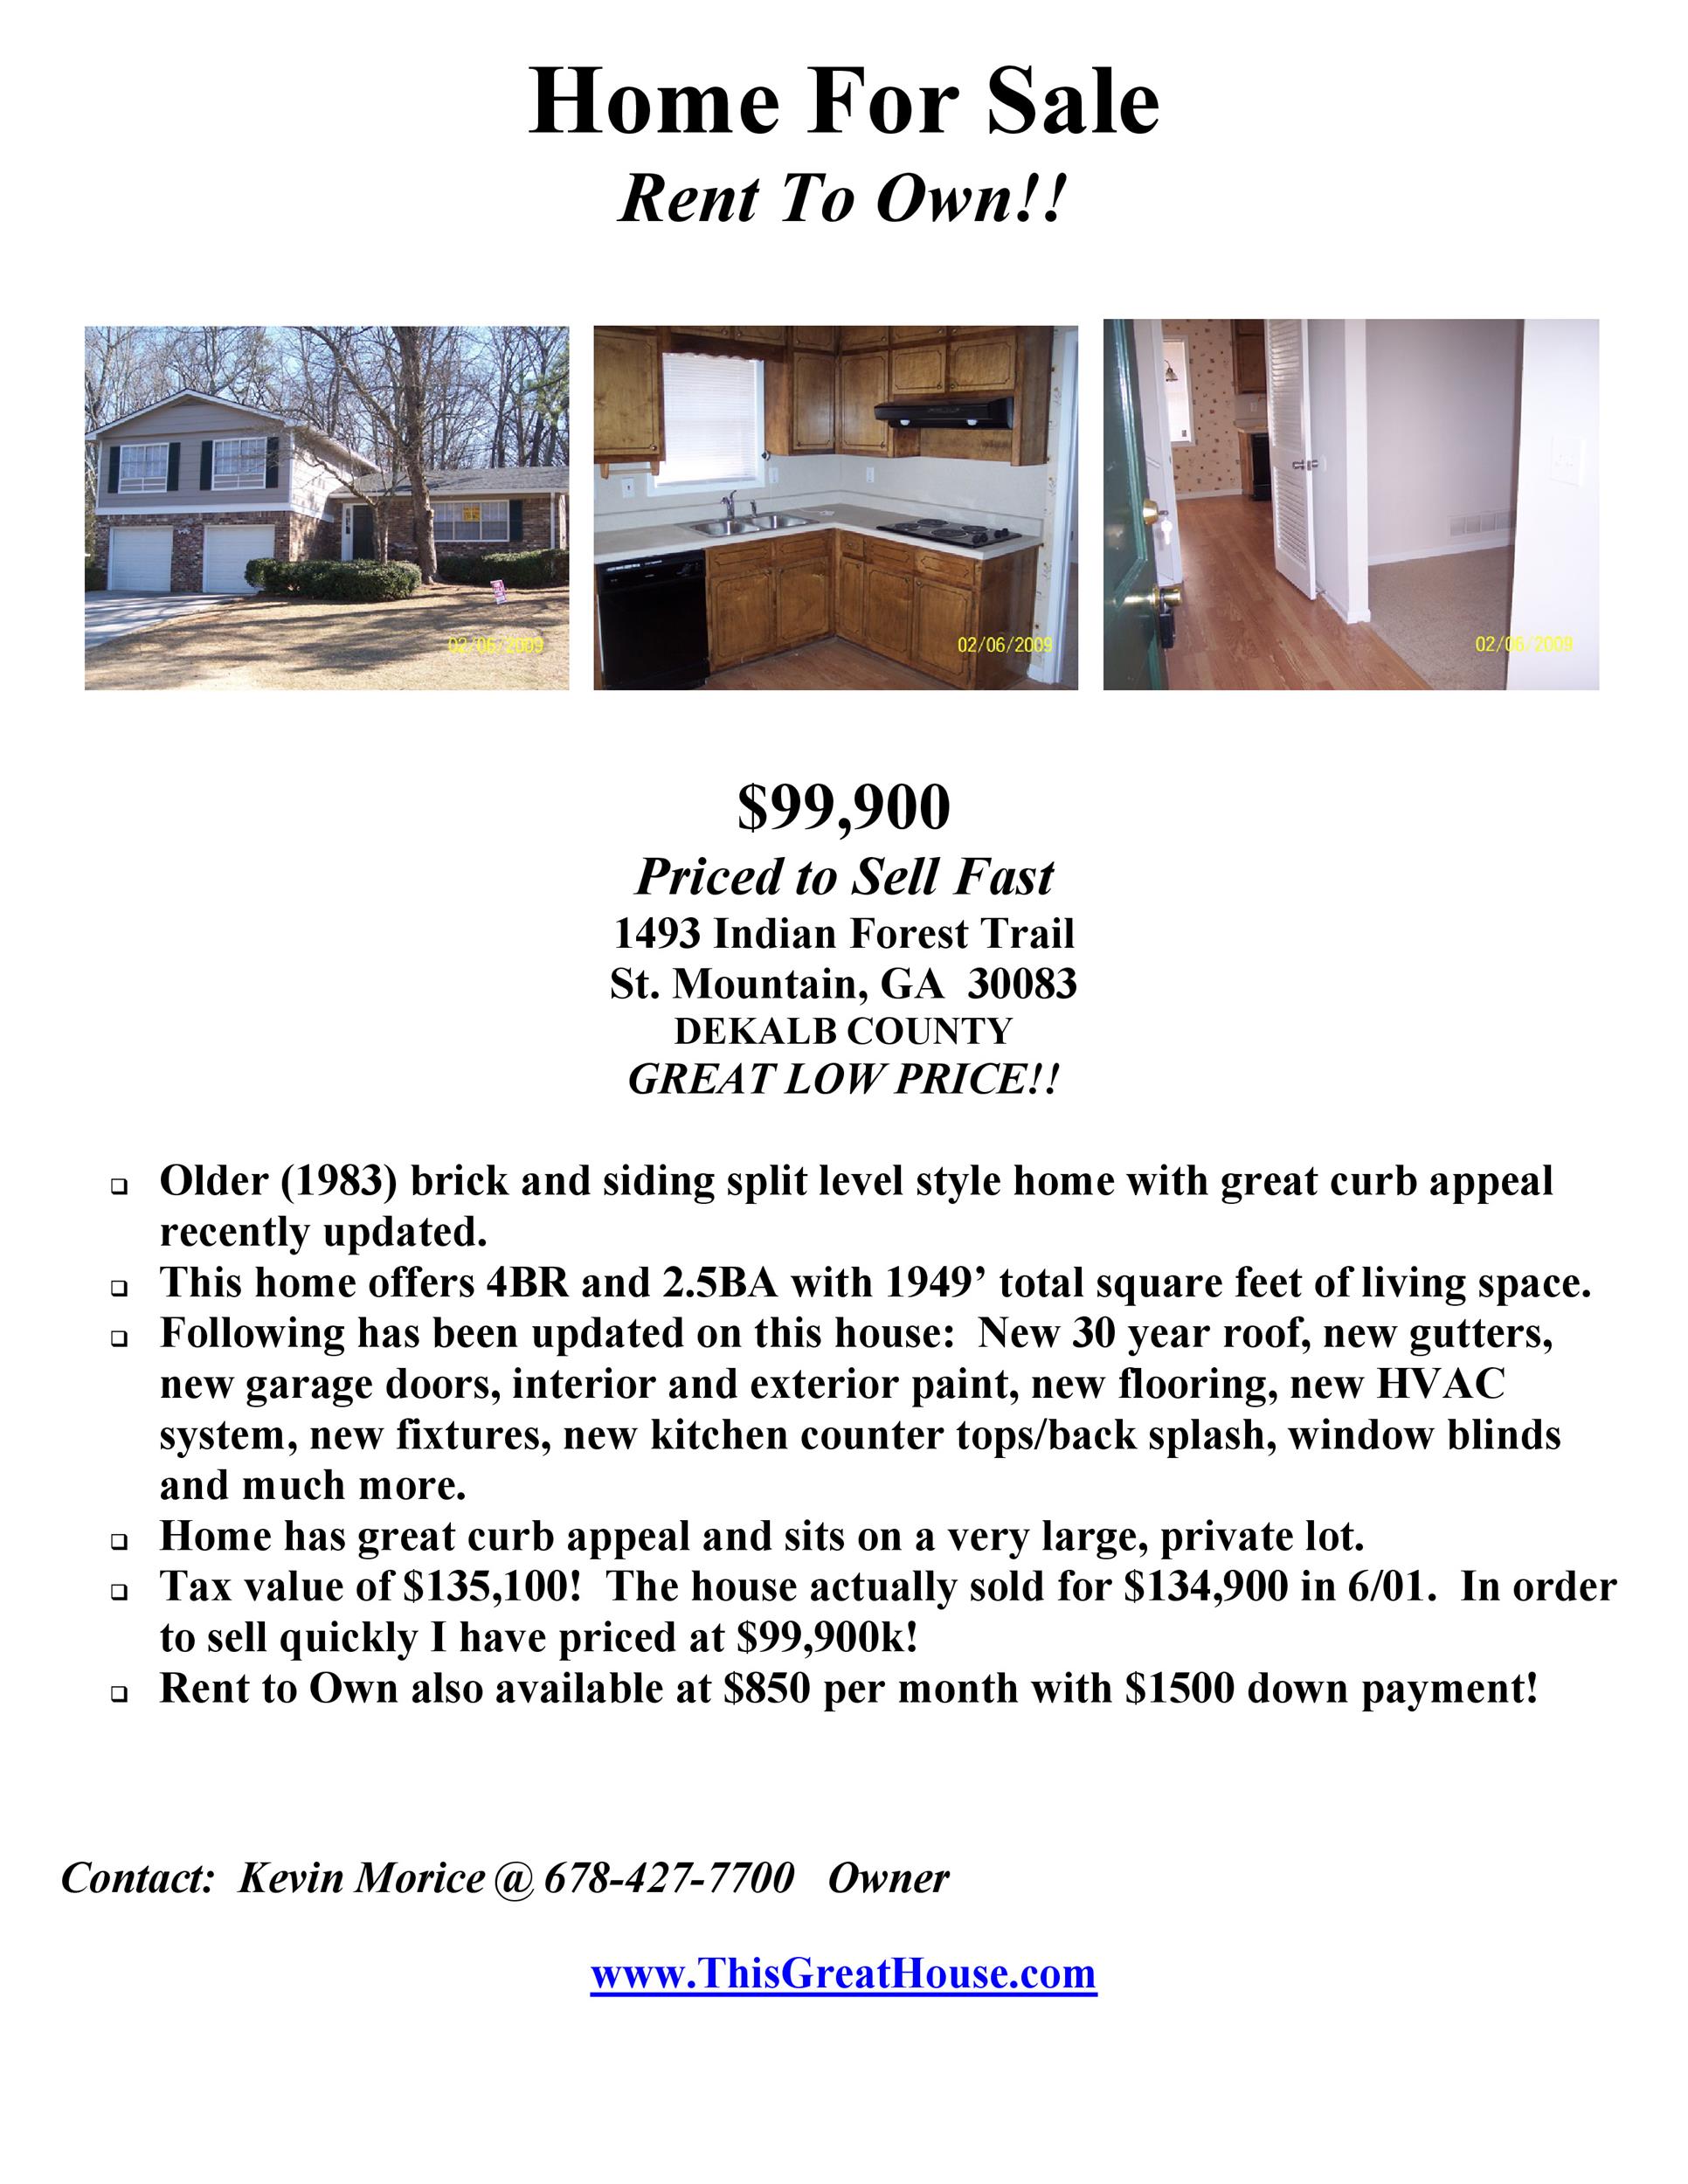 Free house for sale flyer 41